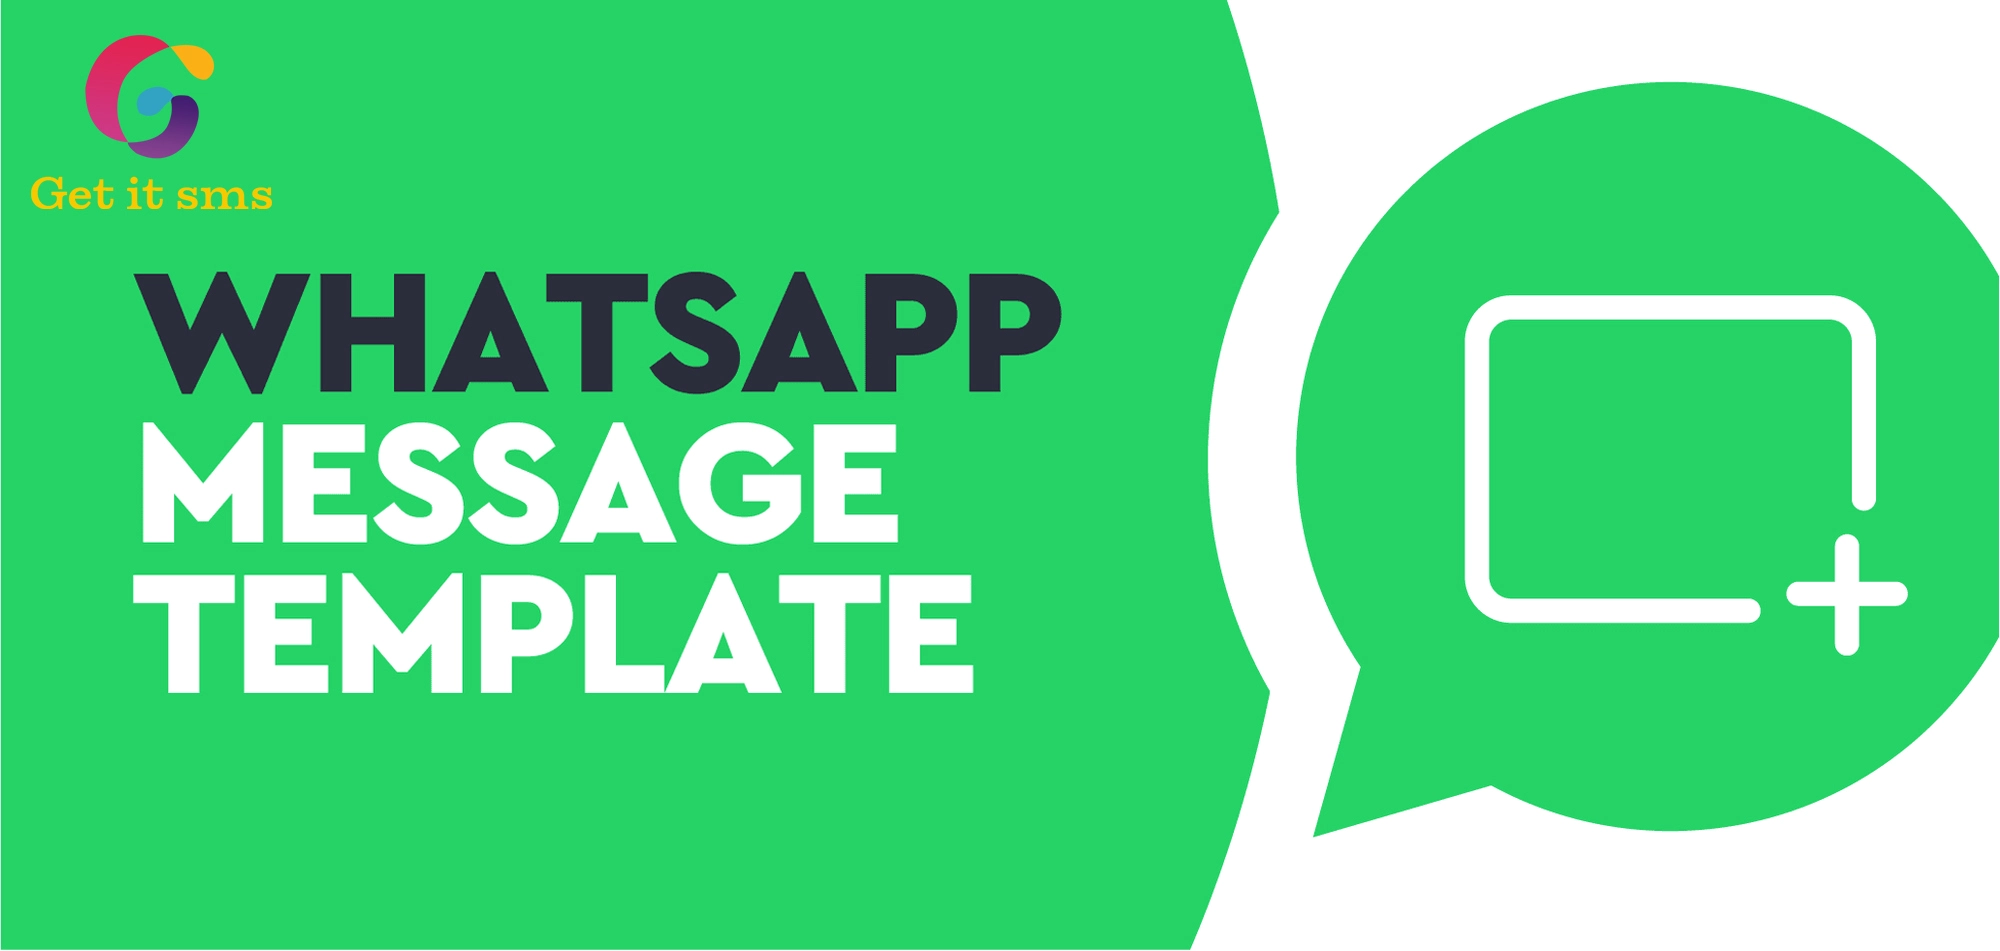 WhatsApp Message Template For Business